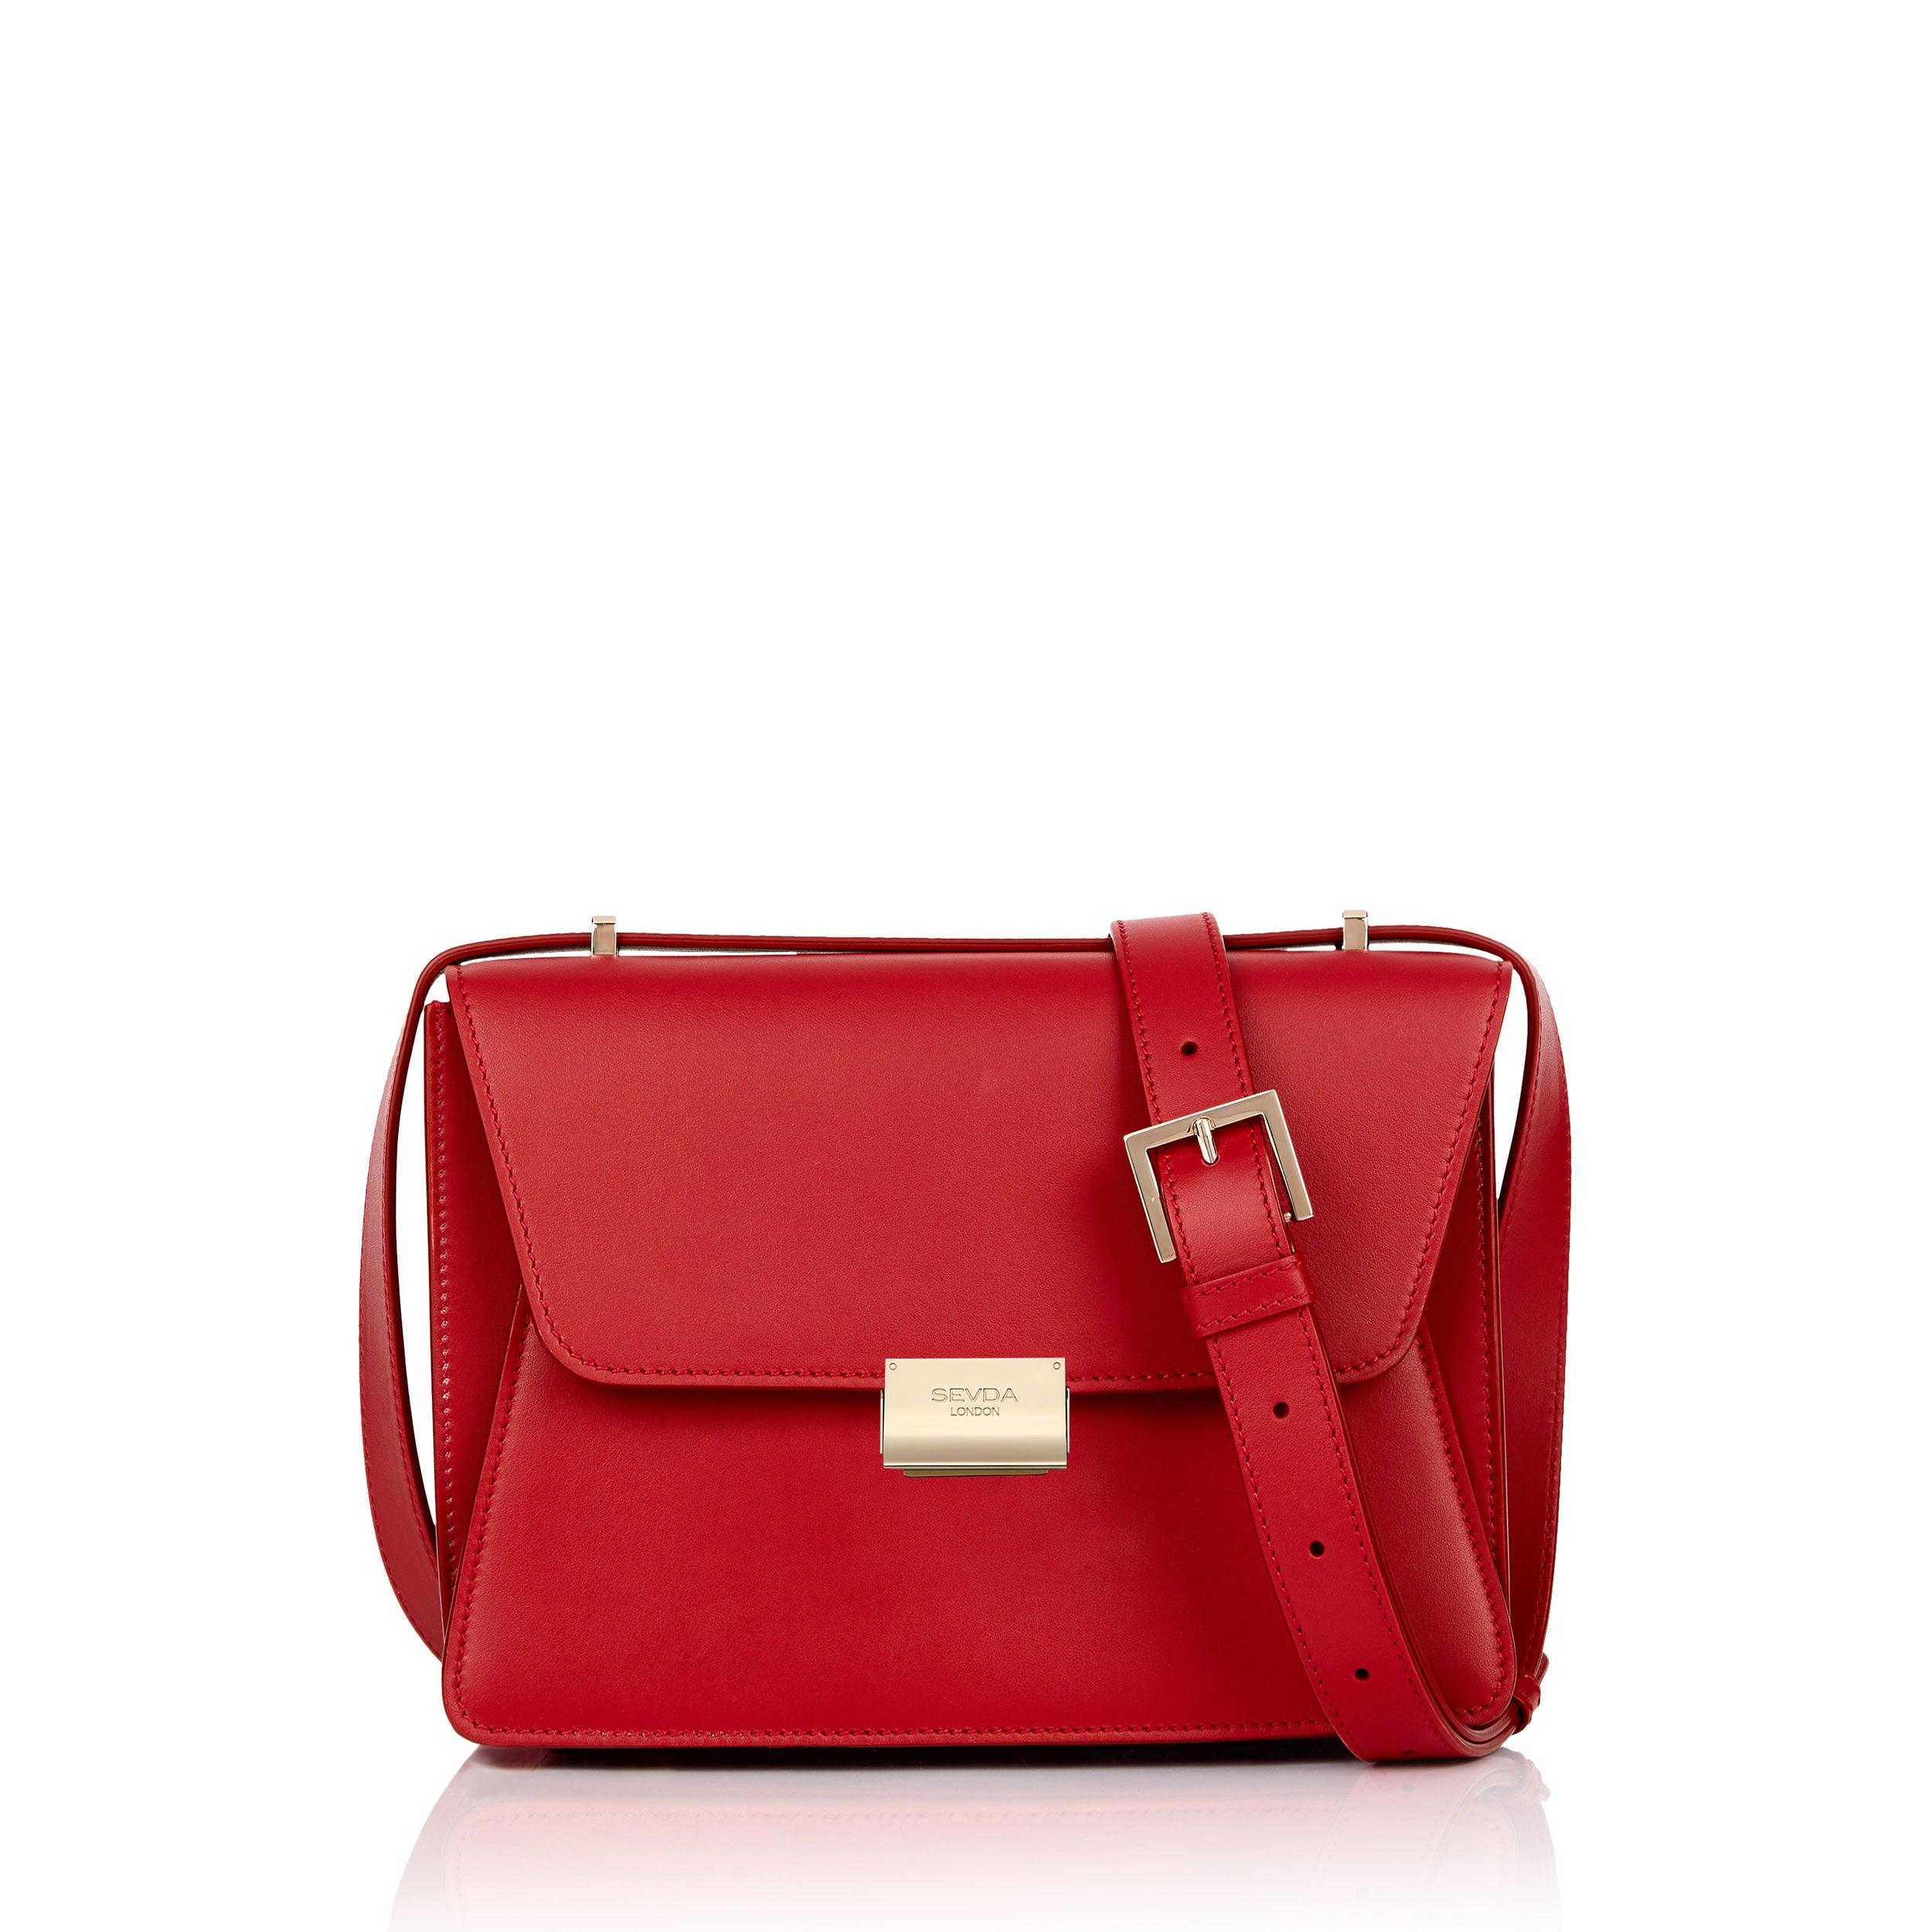  Red Leather Designer Shoulder Bag - The fusion of London's style and Italian craftsmanship.